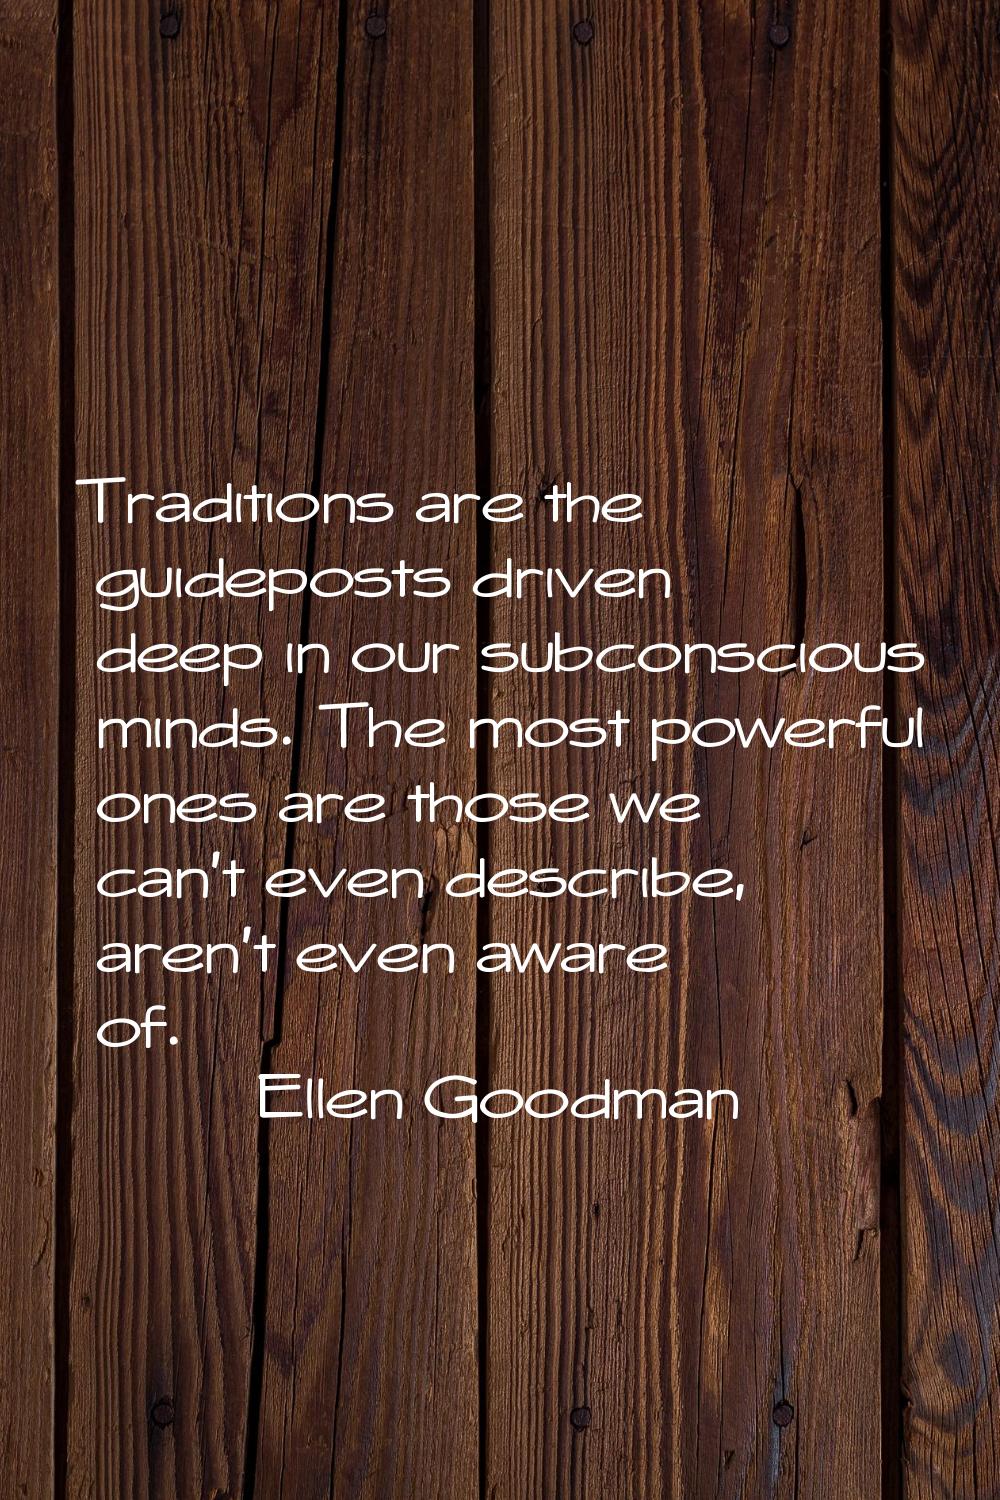 Traditions are the guideposts driven deep in our subconscious minds. The most powerful ones are tho